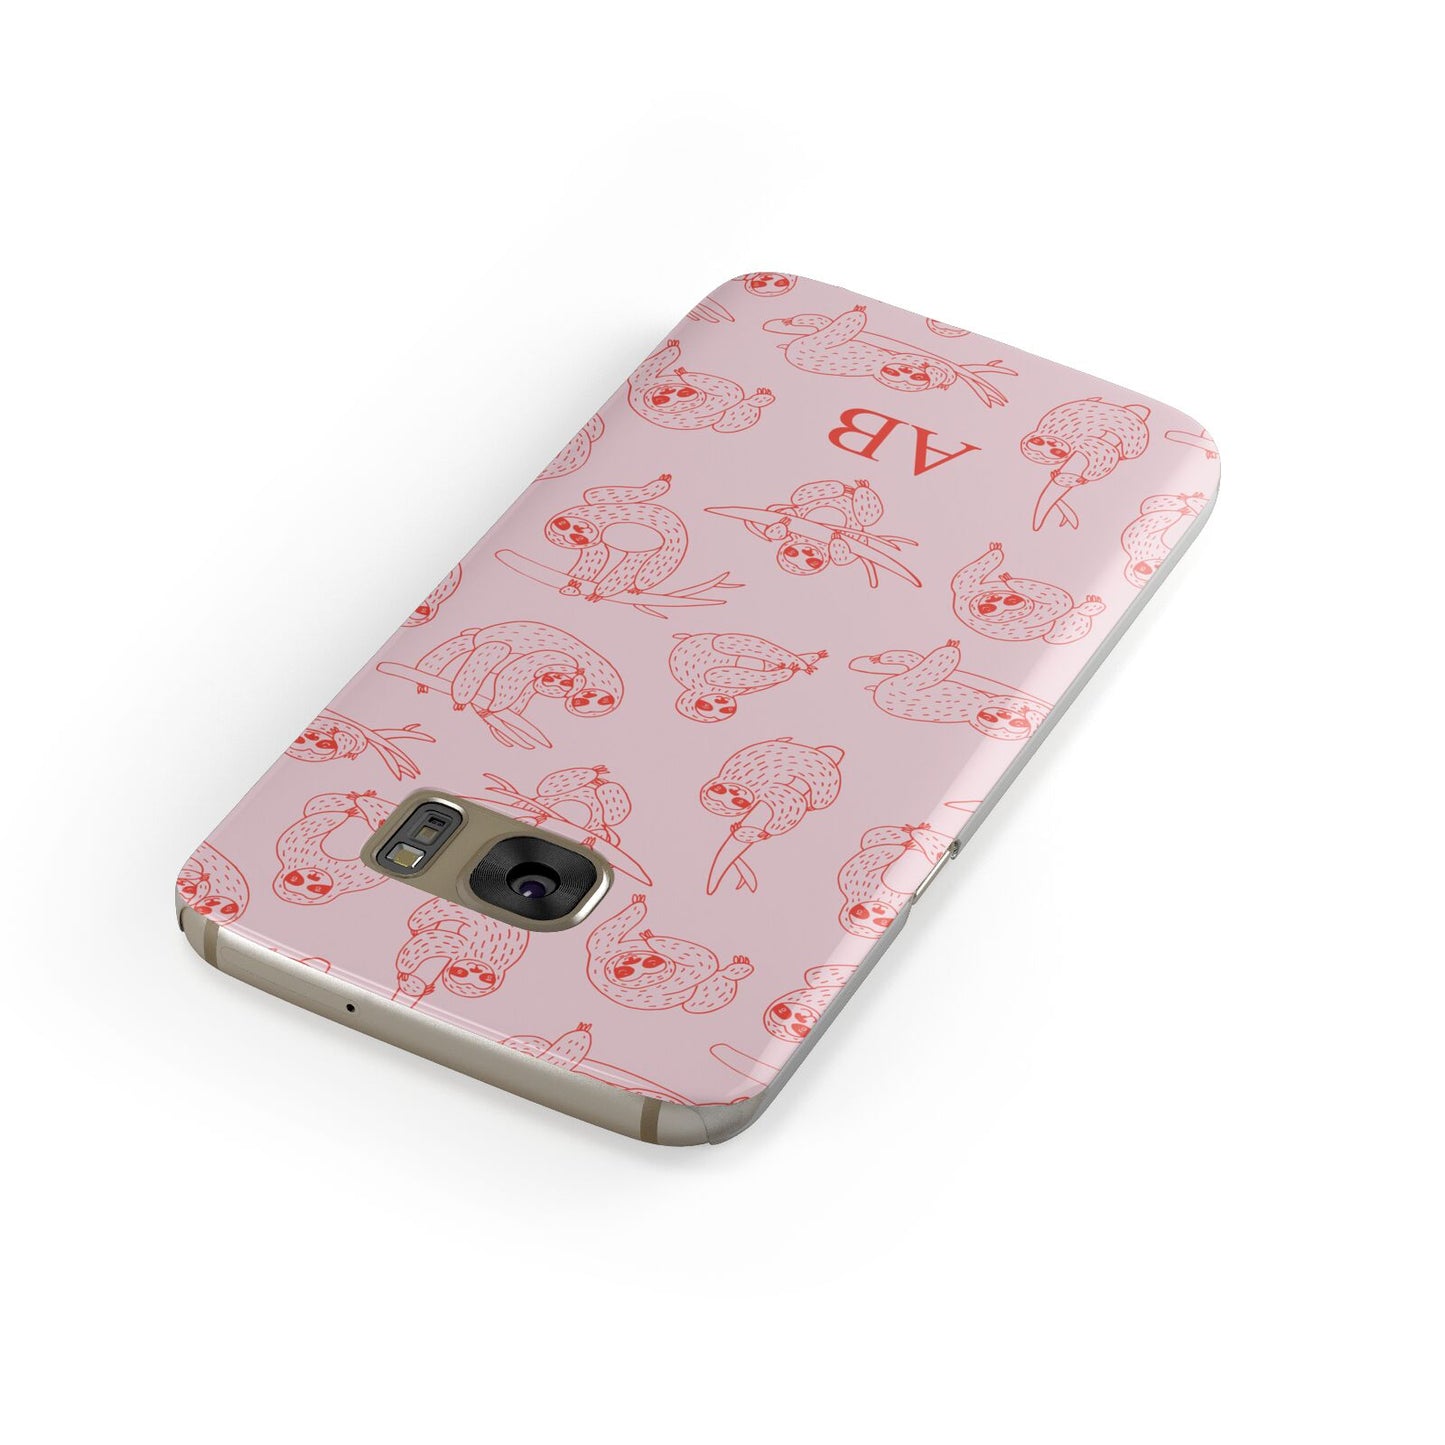 Customised Sloth Samsung Galaxy Case Front Close Up